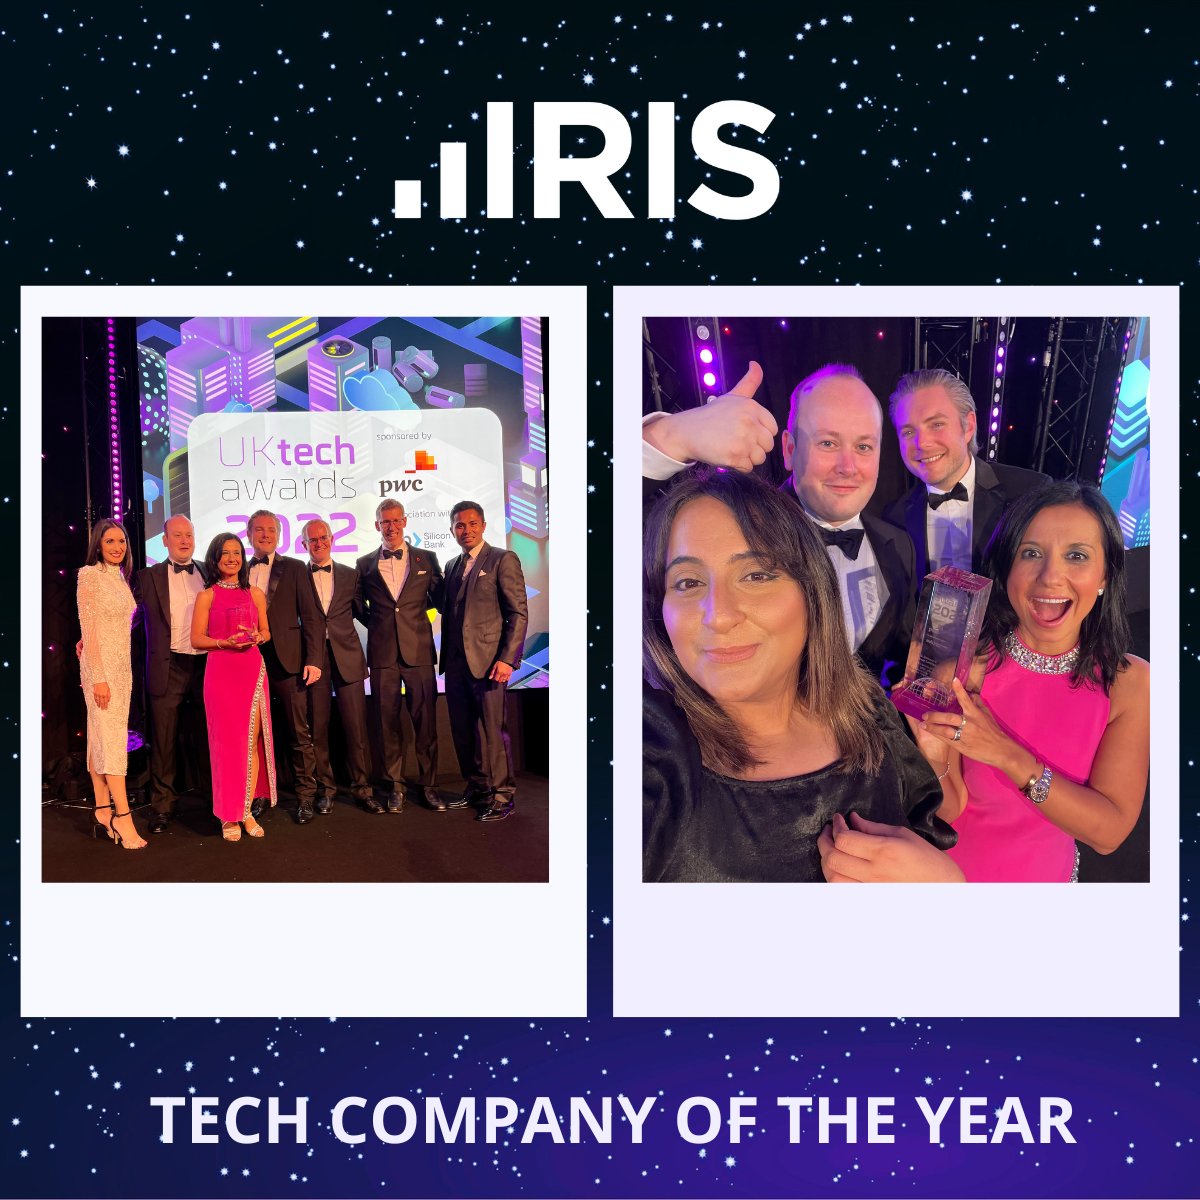 We’re over the moon and delighted to announce that we won ‘Tech Company of the Year’ at the @UKtech_awards 🙌🥳

Thank you to our amazing colleagues, customers & partners – you are the reason for our being.

Read more here: bit.ly/3UqNw4h

#UKTechAwards #UKTech22 #1RIS